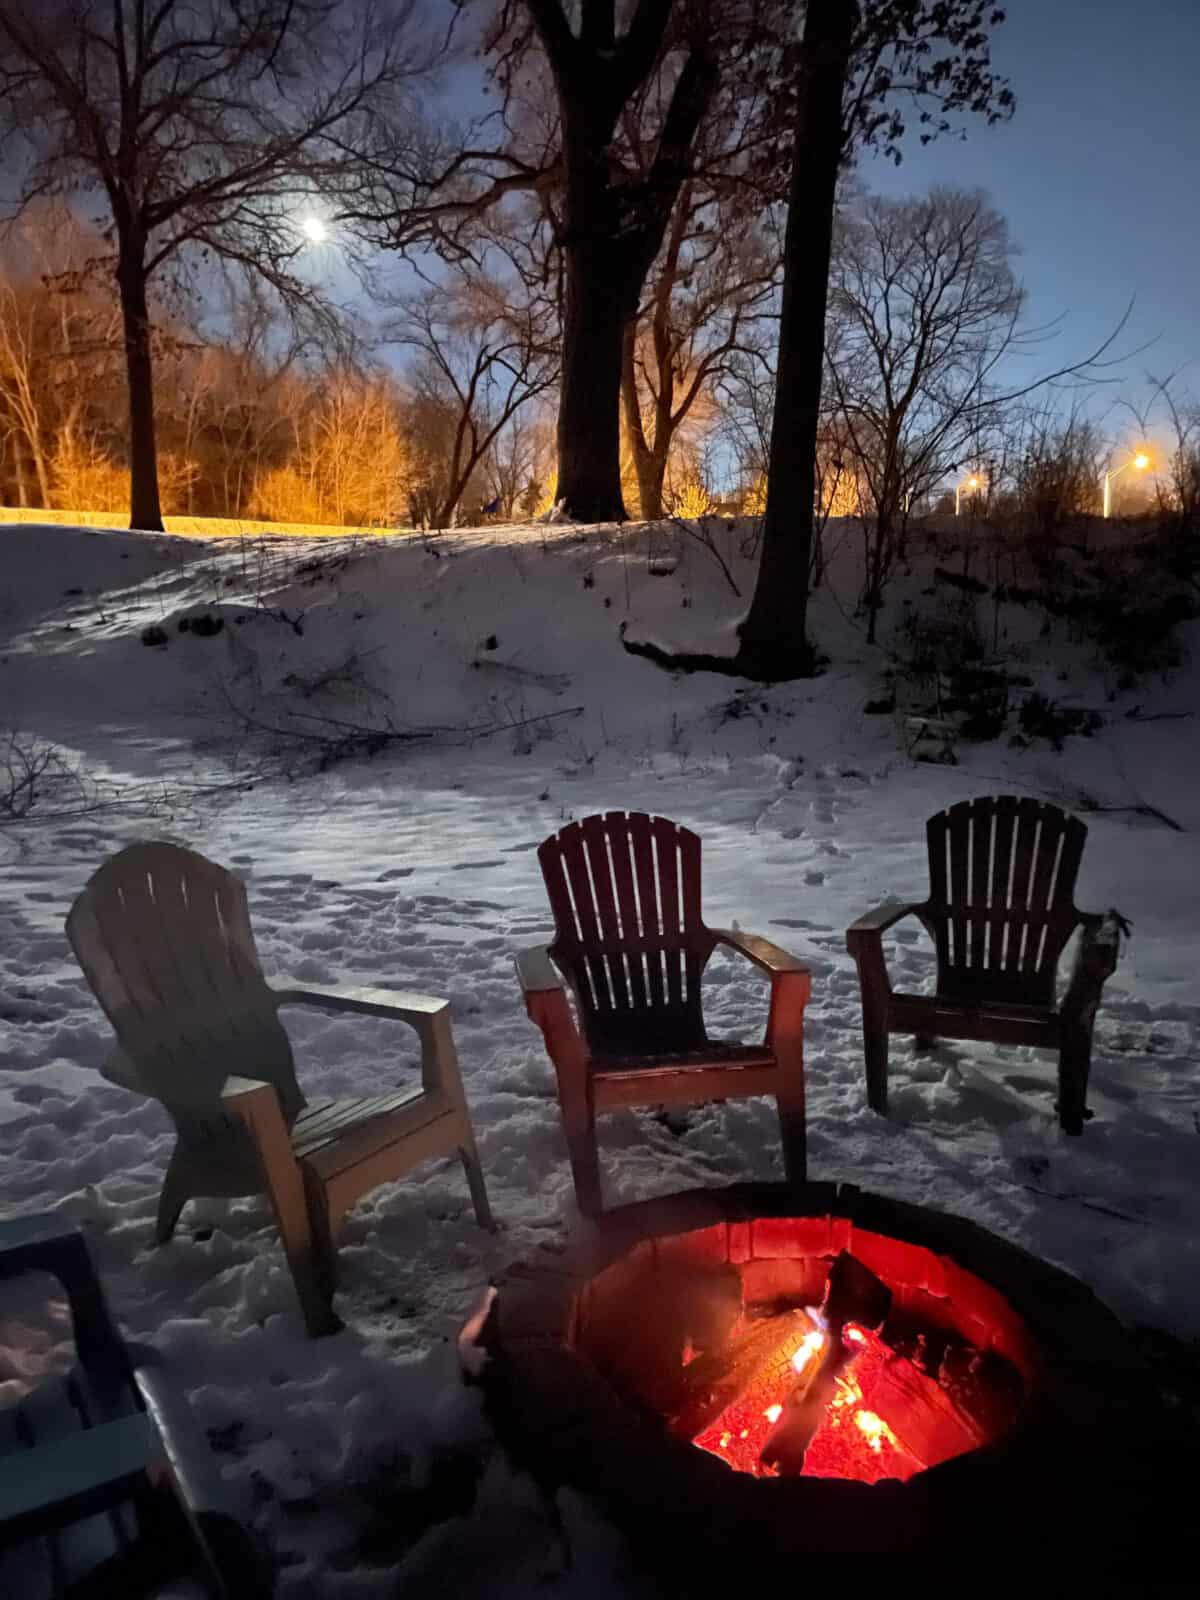 campfire in the snow with three trees